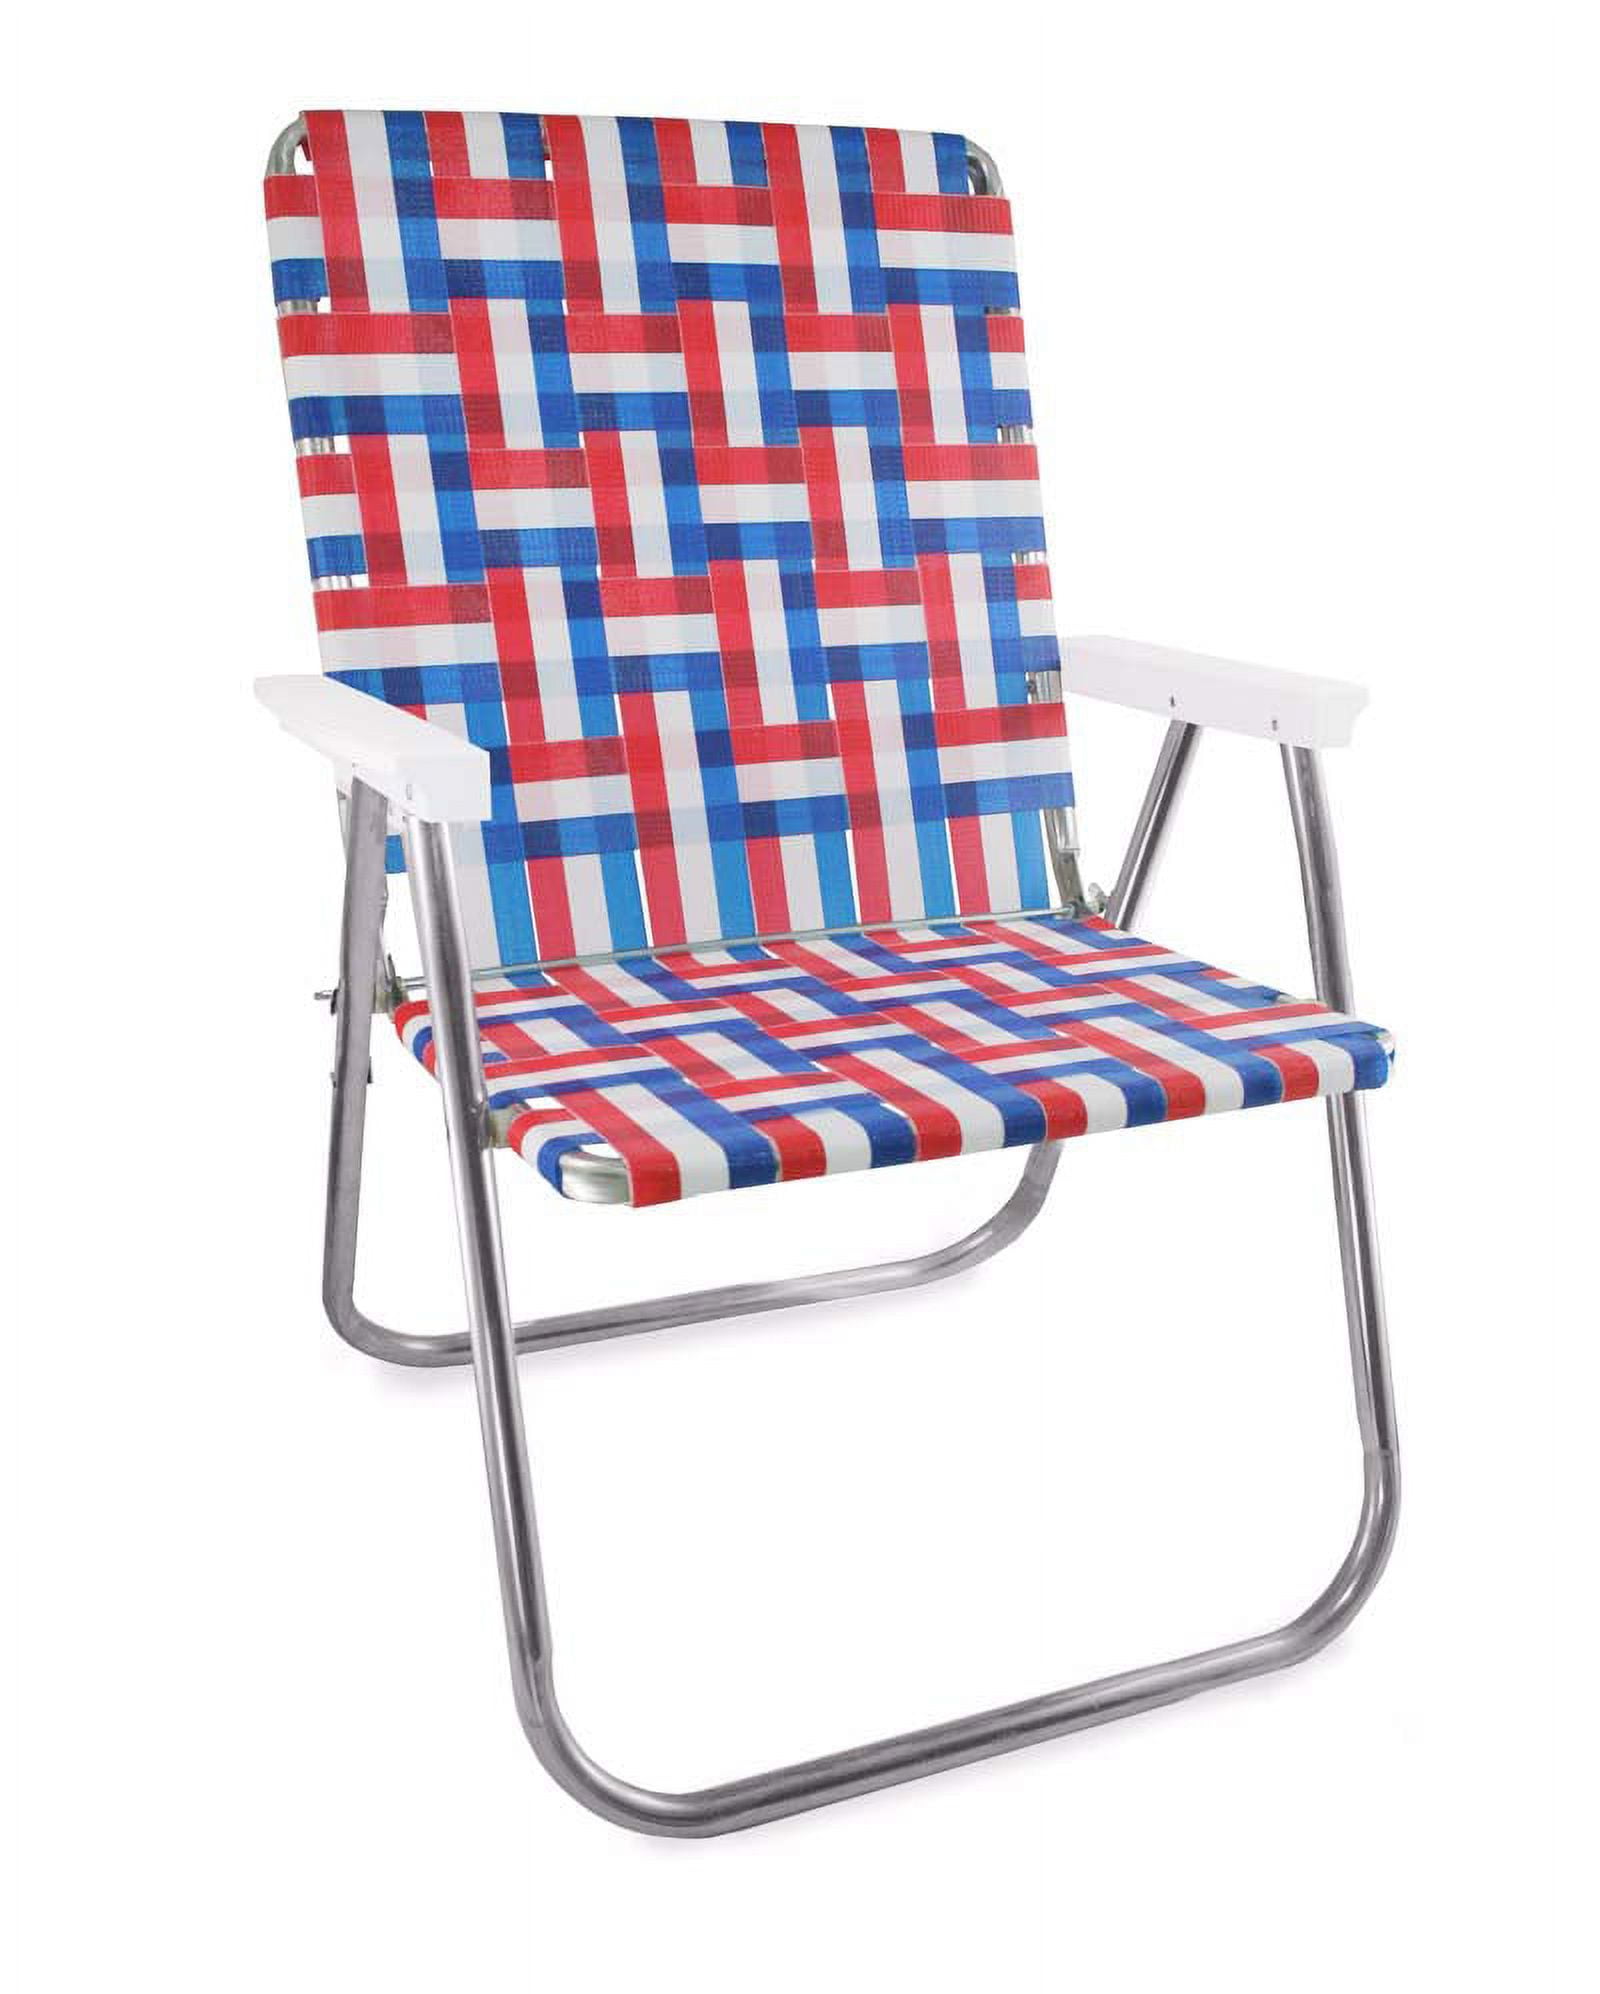 Lawn Chair USA - Classic Folding Aluminum Webbed Chair - Durable, Portable, and Comfortable Outdoor Chair - Ideal for Camping, Sports, and Concerts - Yellow//White with White arms